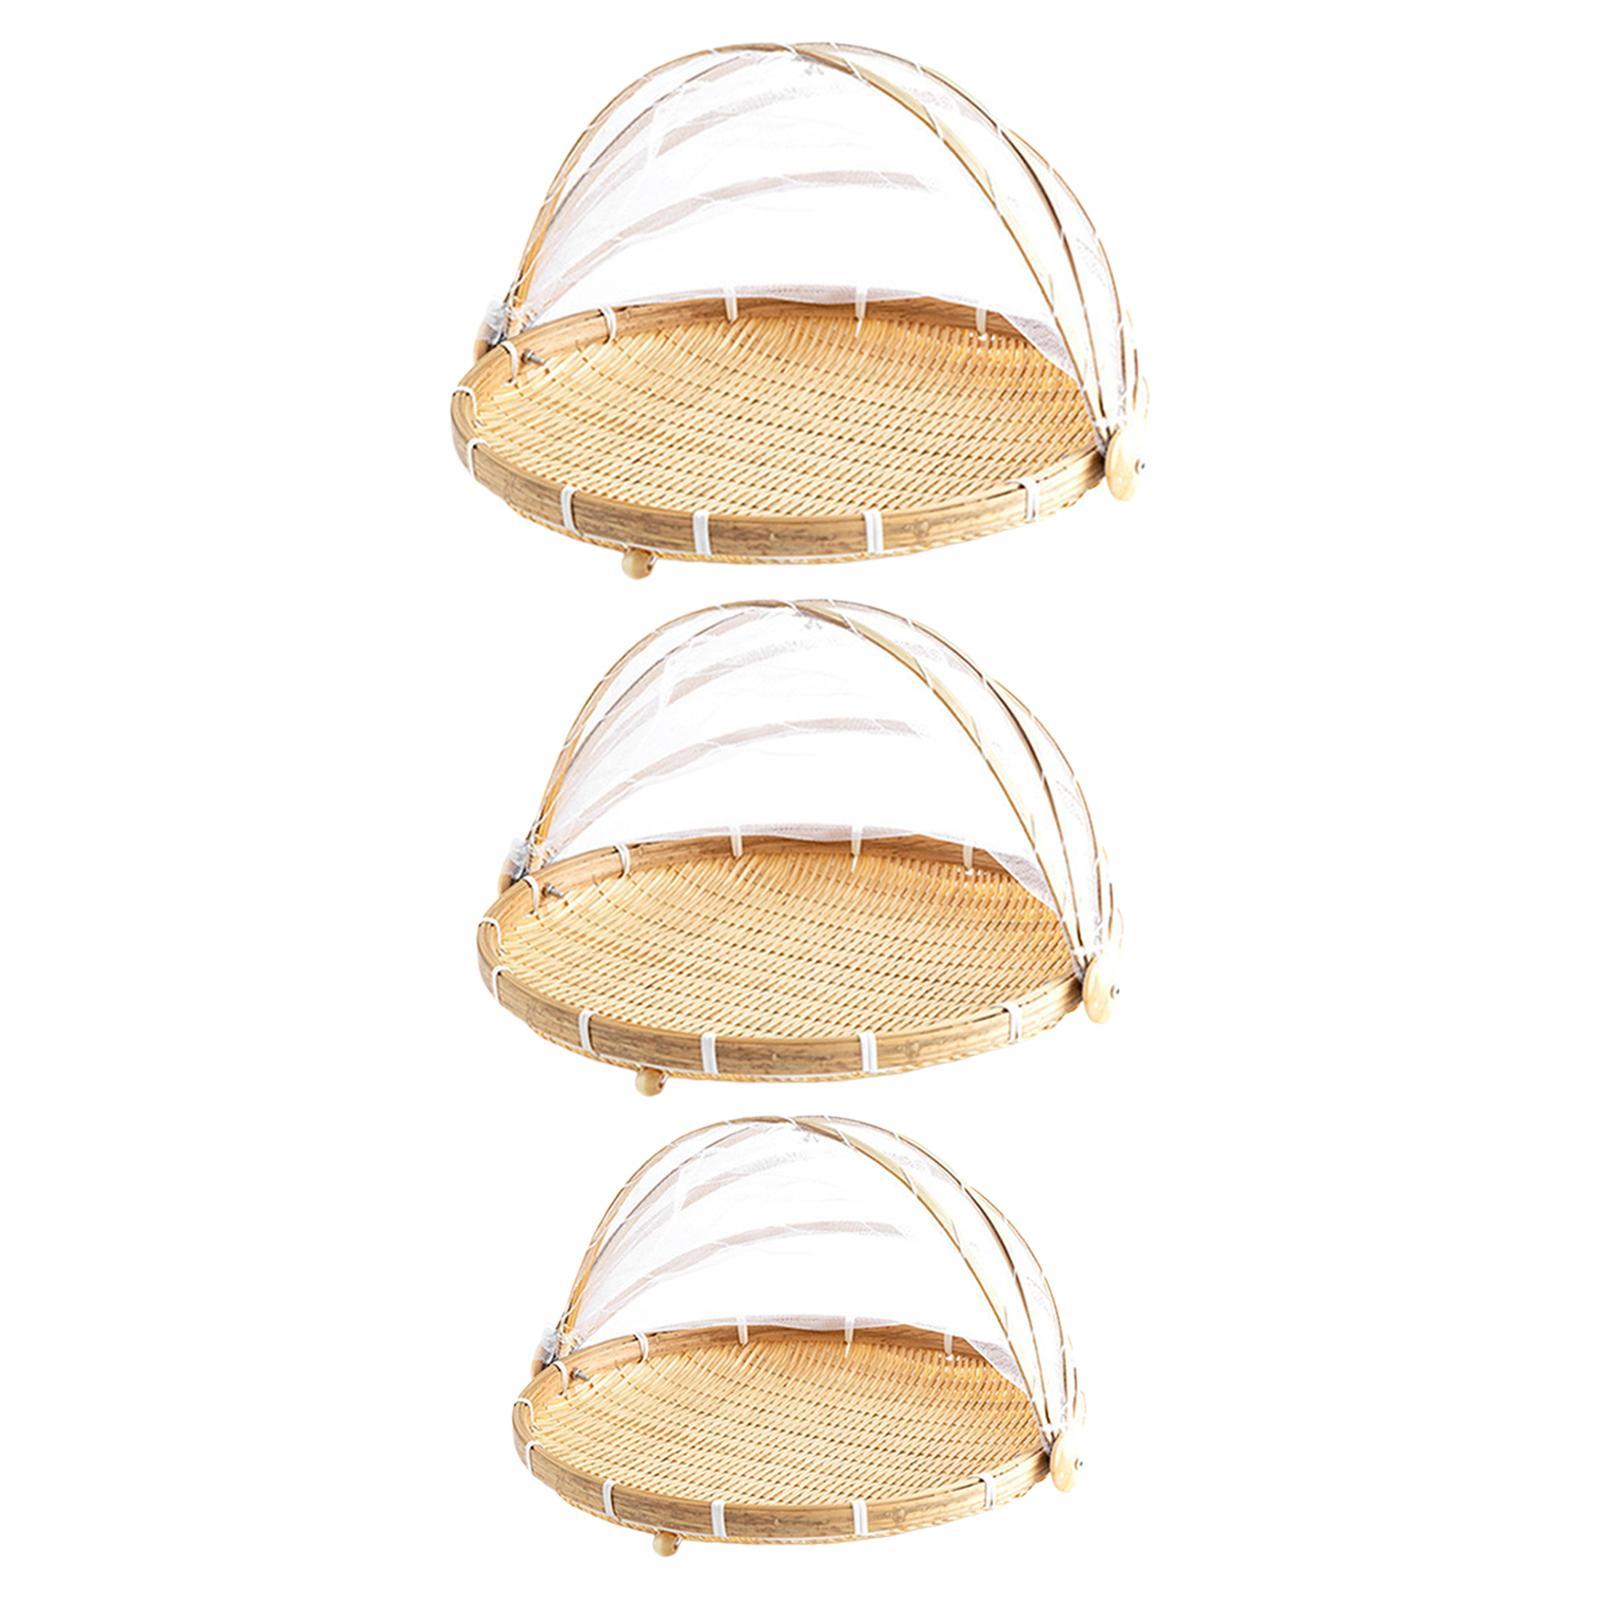 Bamboo Food Serving Tent Basket Fruit Bowls Handmade for Rustic Outdoor